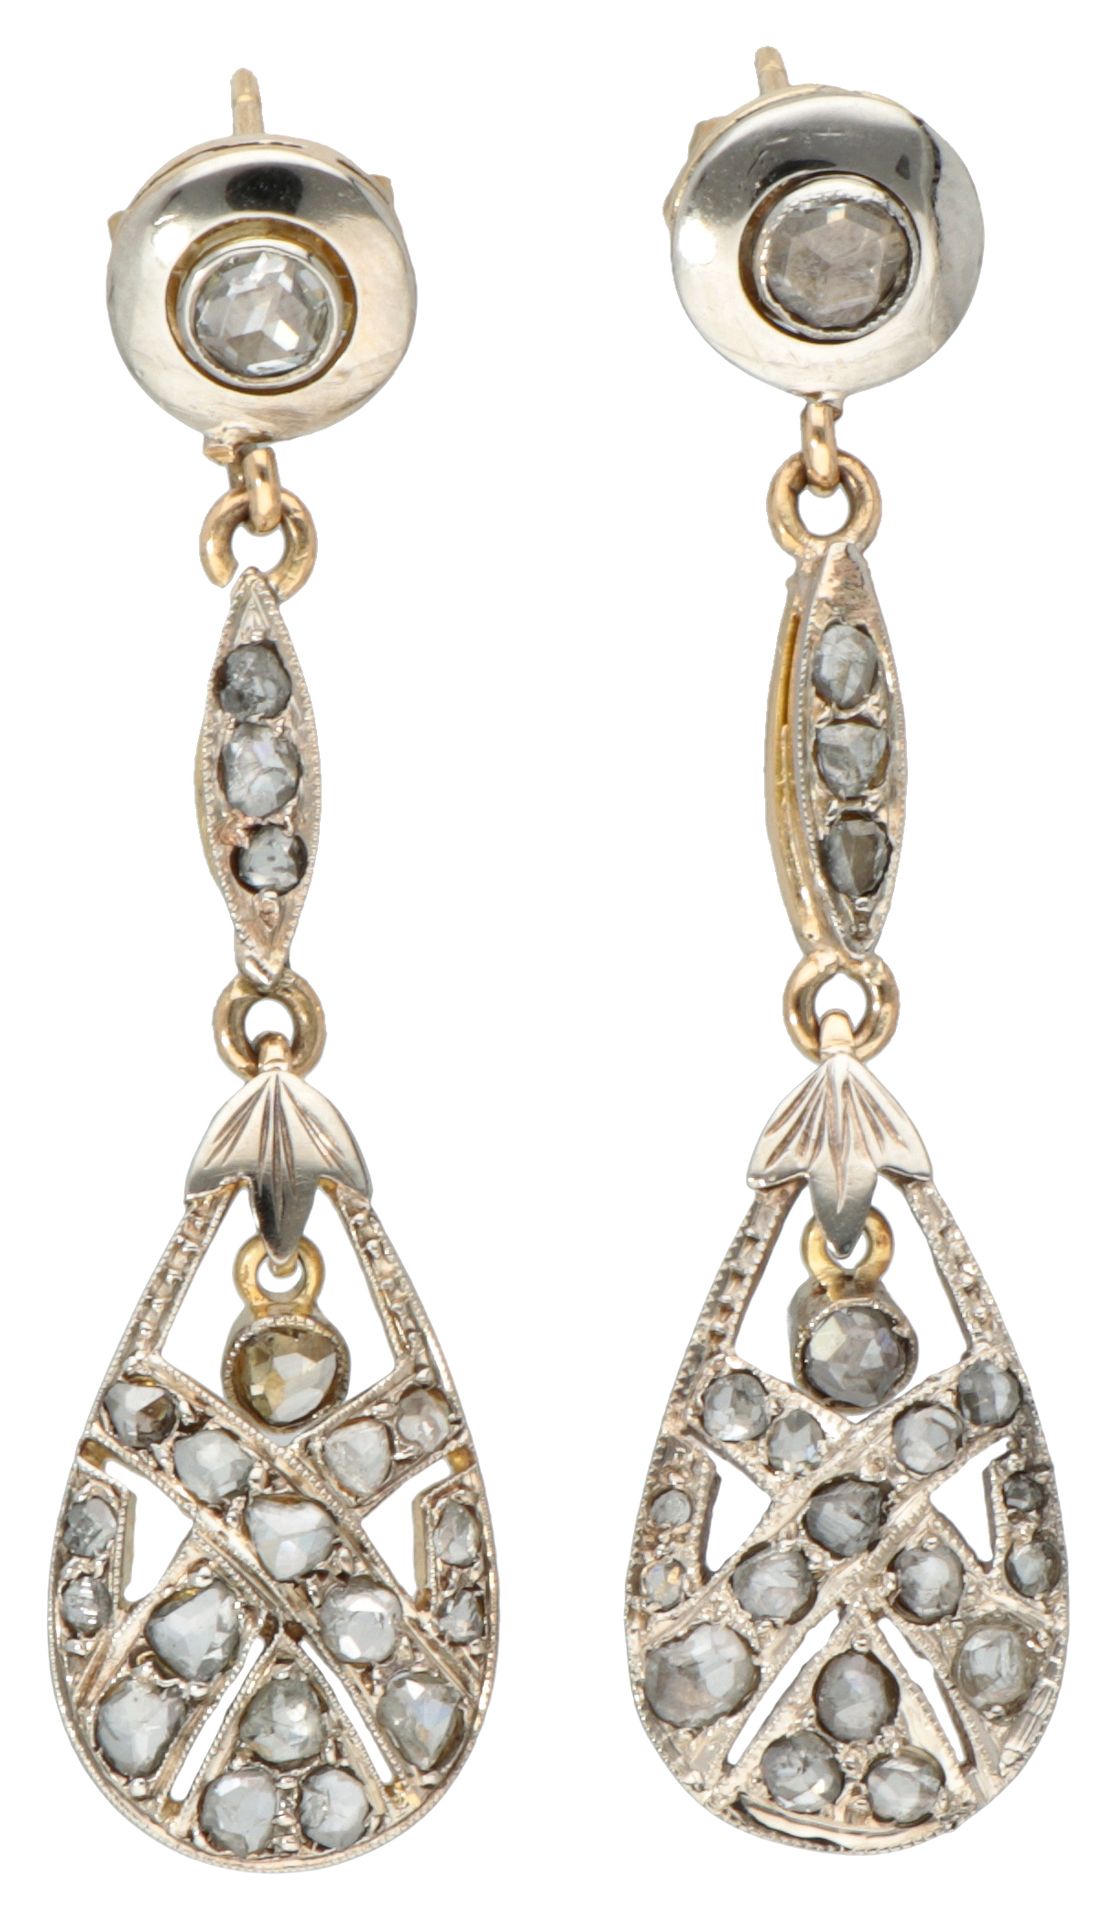 14K. Bicolor gold earrings set with rose cut diamonds. Hallmarks: 585. Set with &hellip;